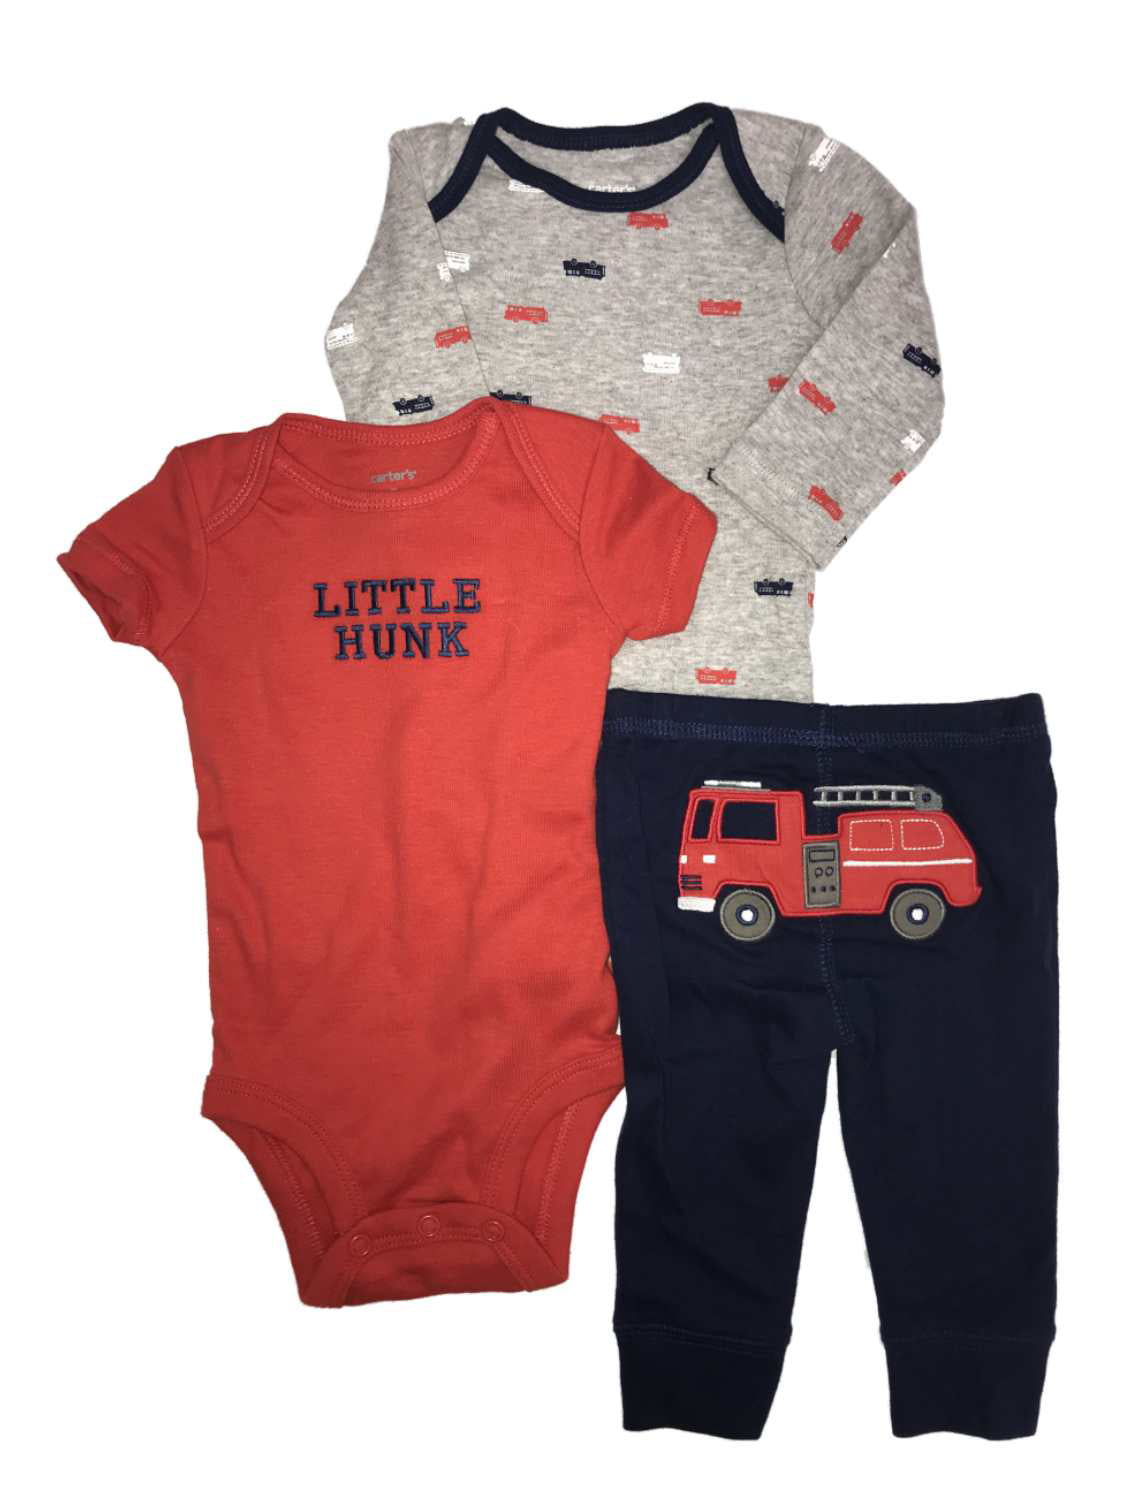 New Carter's 1 Piece Baby Boys Romper Blue White Striped Fire Truck Shorts 